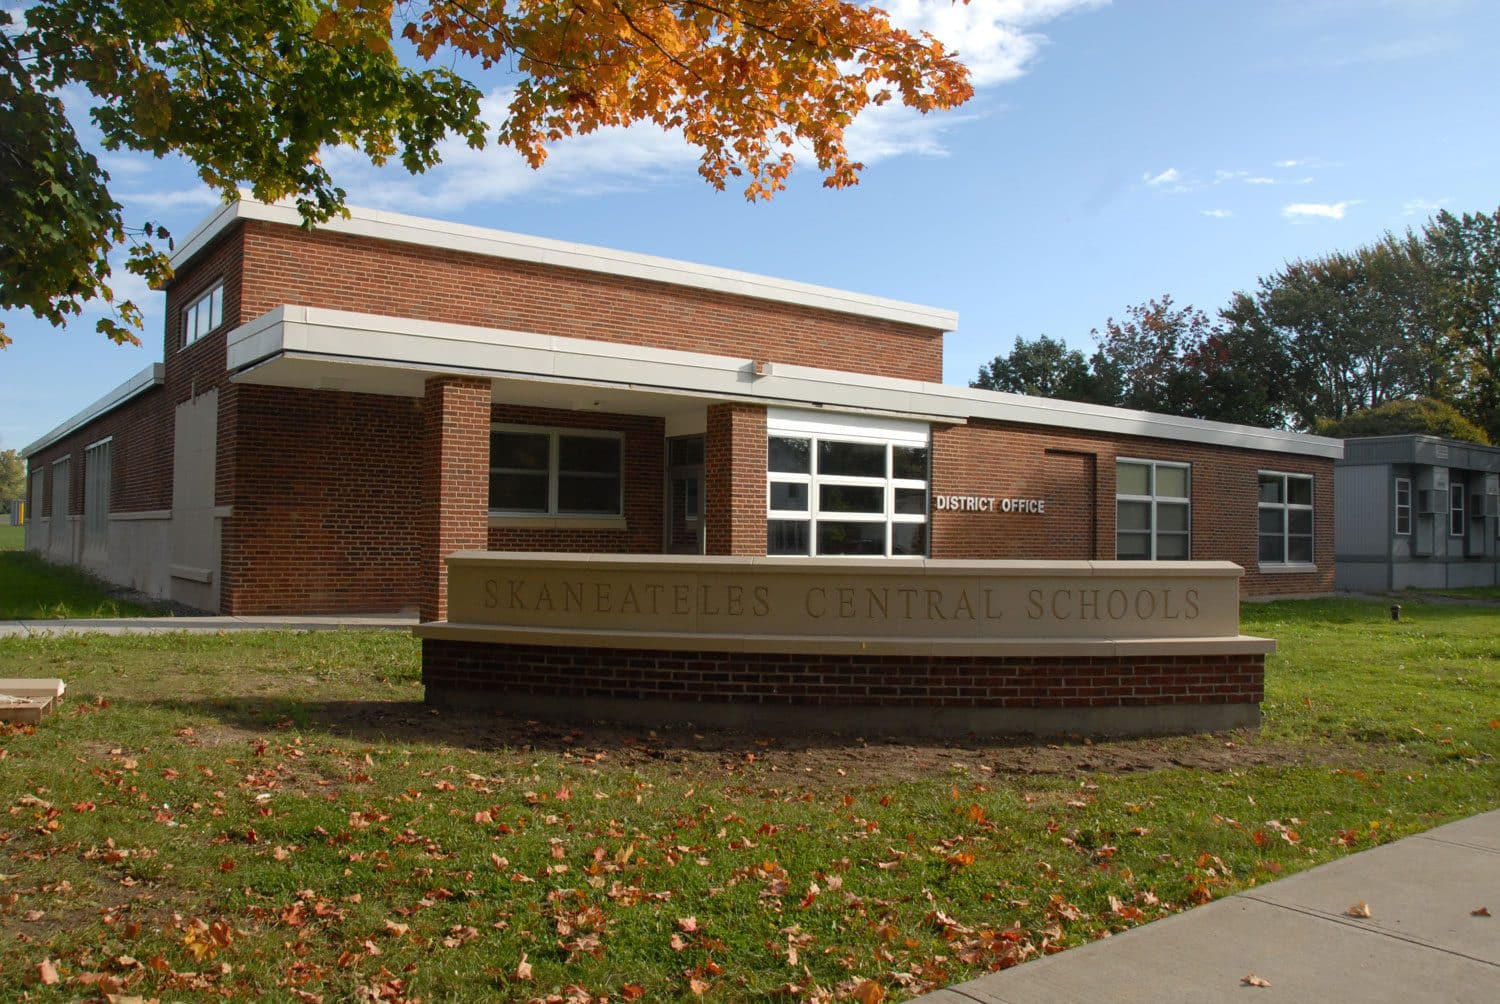 Skaneateles Central School District BCA Architects & Engineers